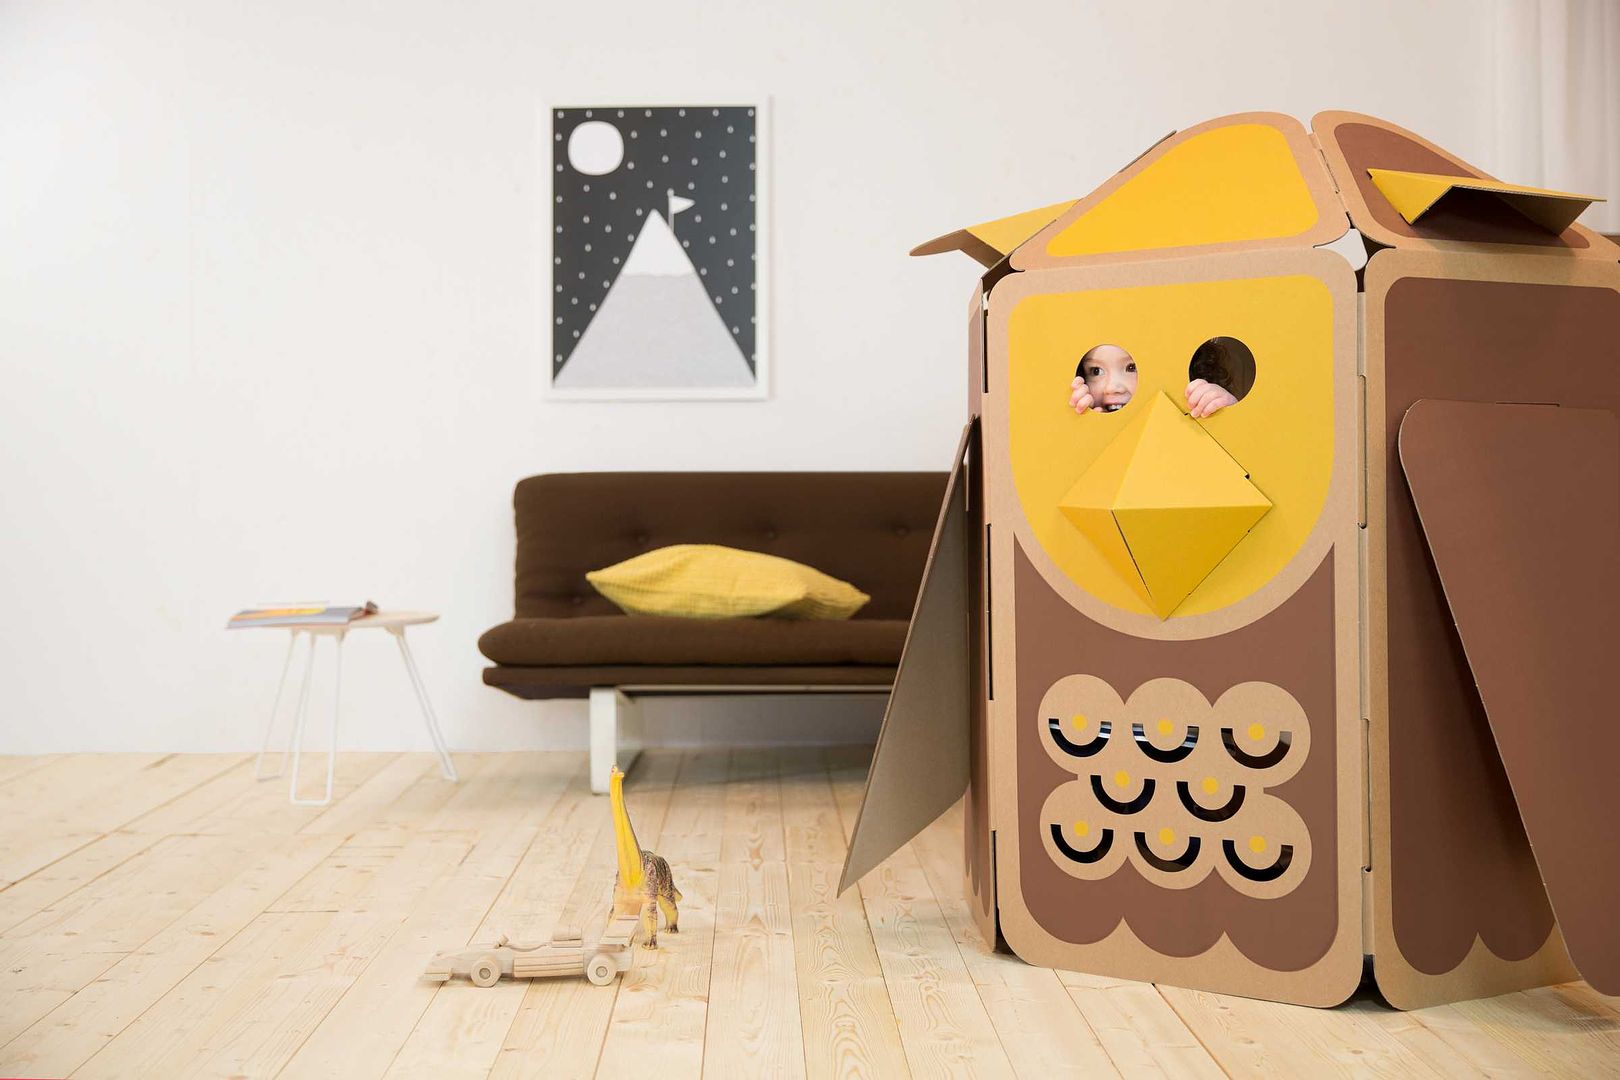 Adorable recyclable Hulki cardboard playhouse in shapes like owls, whales and turtles.